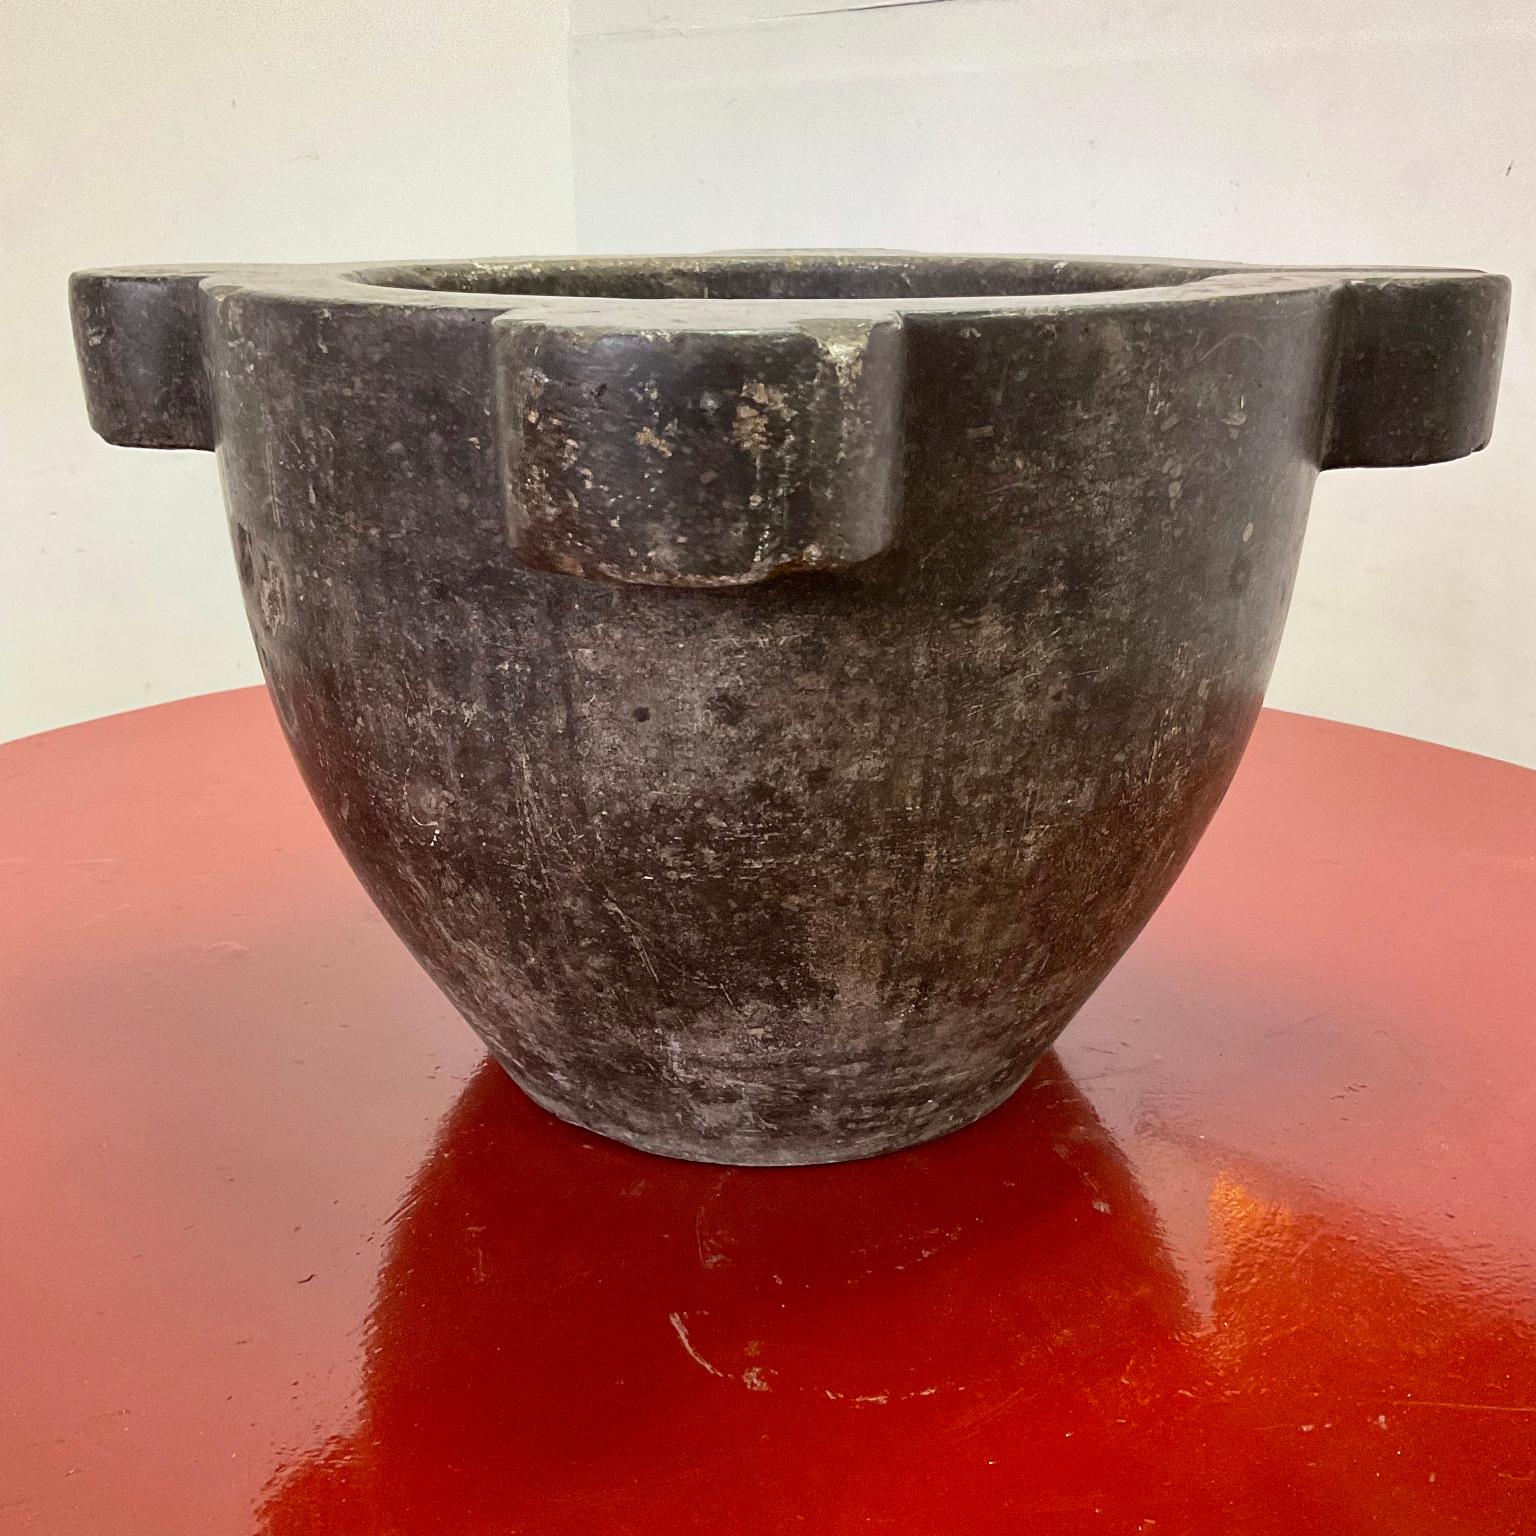 Exceptional and rare, early 19th-century large black marble apothecary mortar with ears and spout.
Outside dimensions :
51cm diameter and 30.5cm height
Inside dimensions :
31cm diameter and 20cm depth.